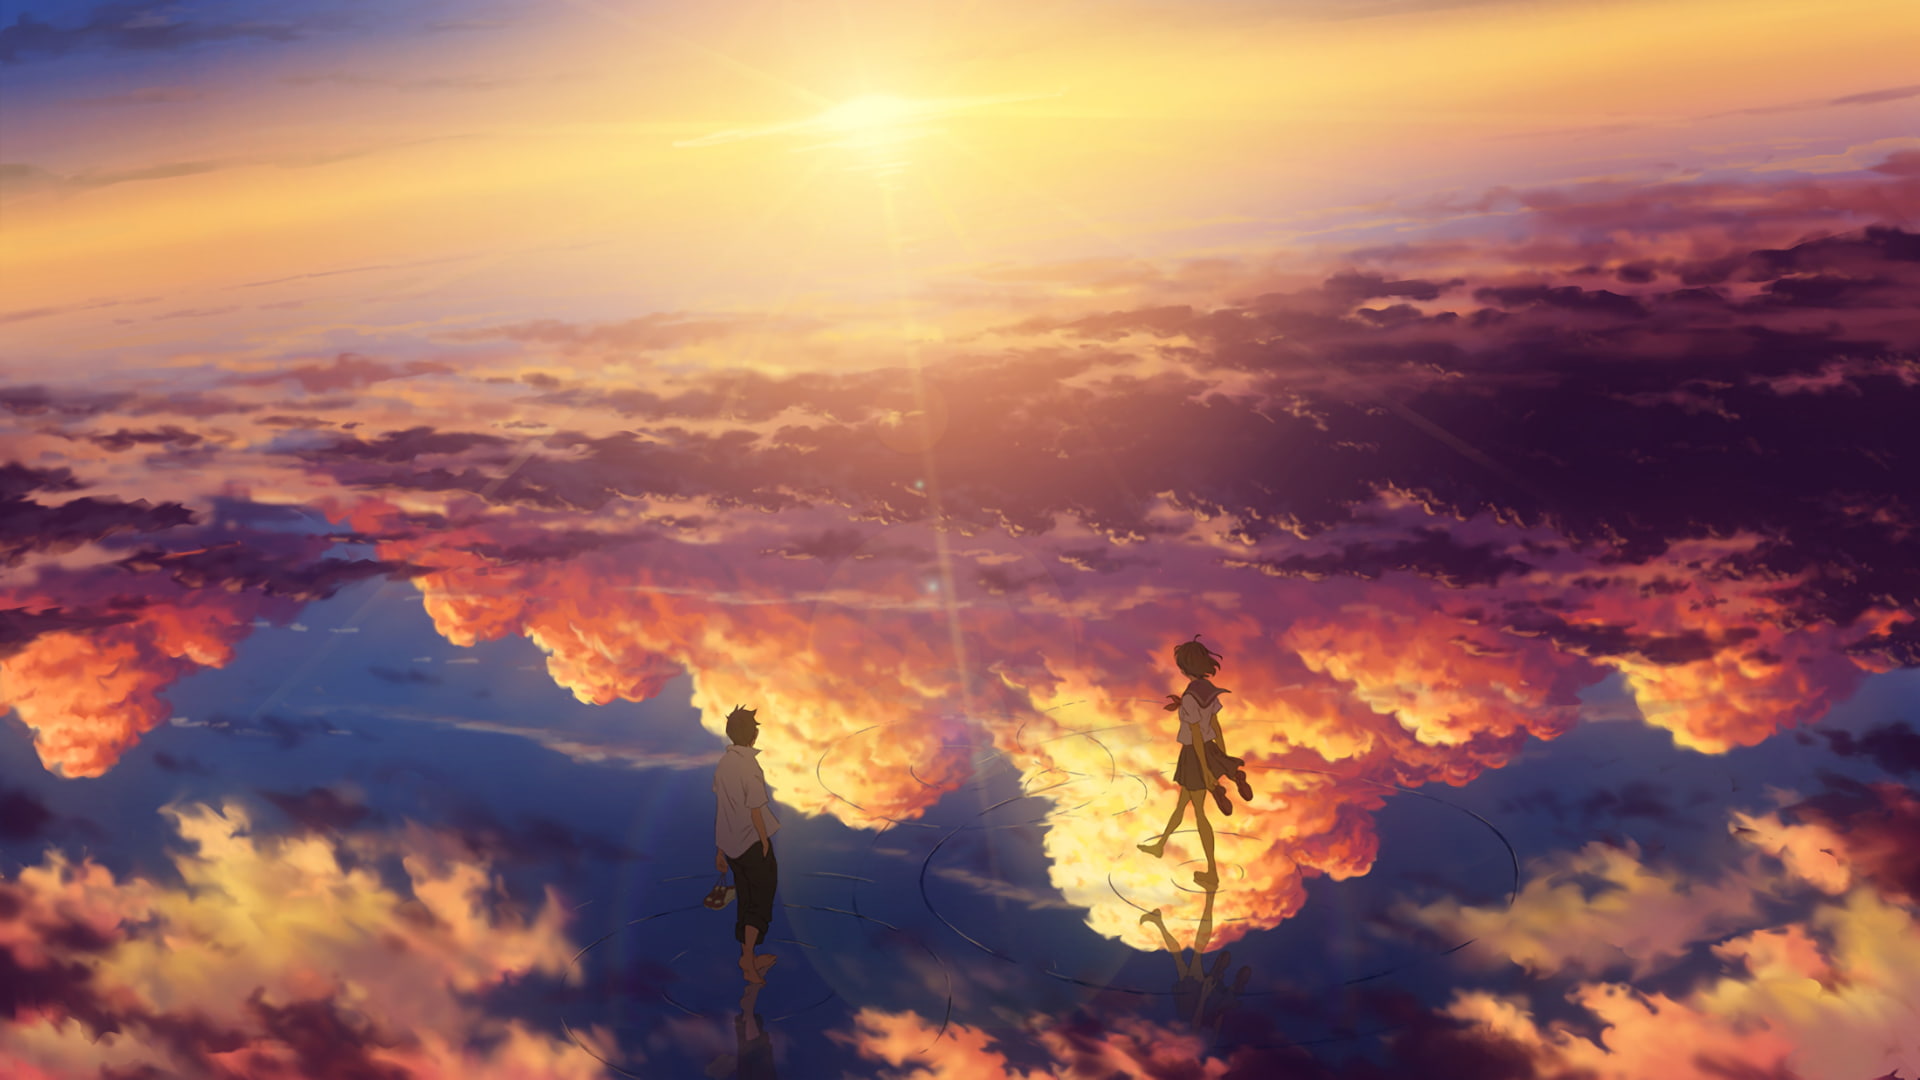 anime landscape, beyond the clouds, sunset, anime girl and boy